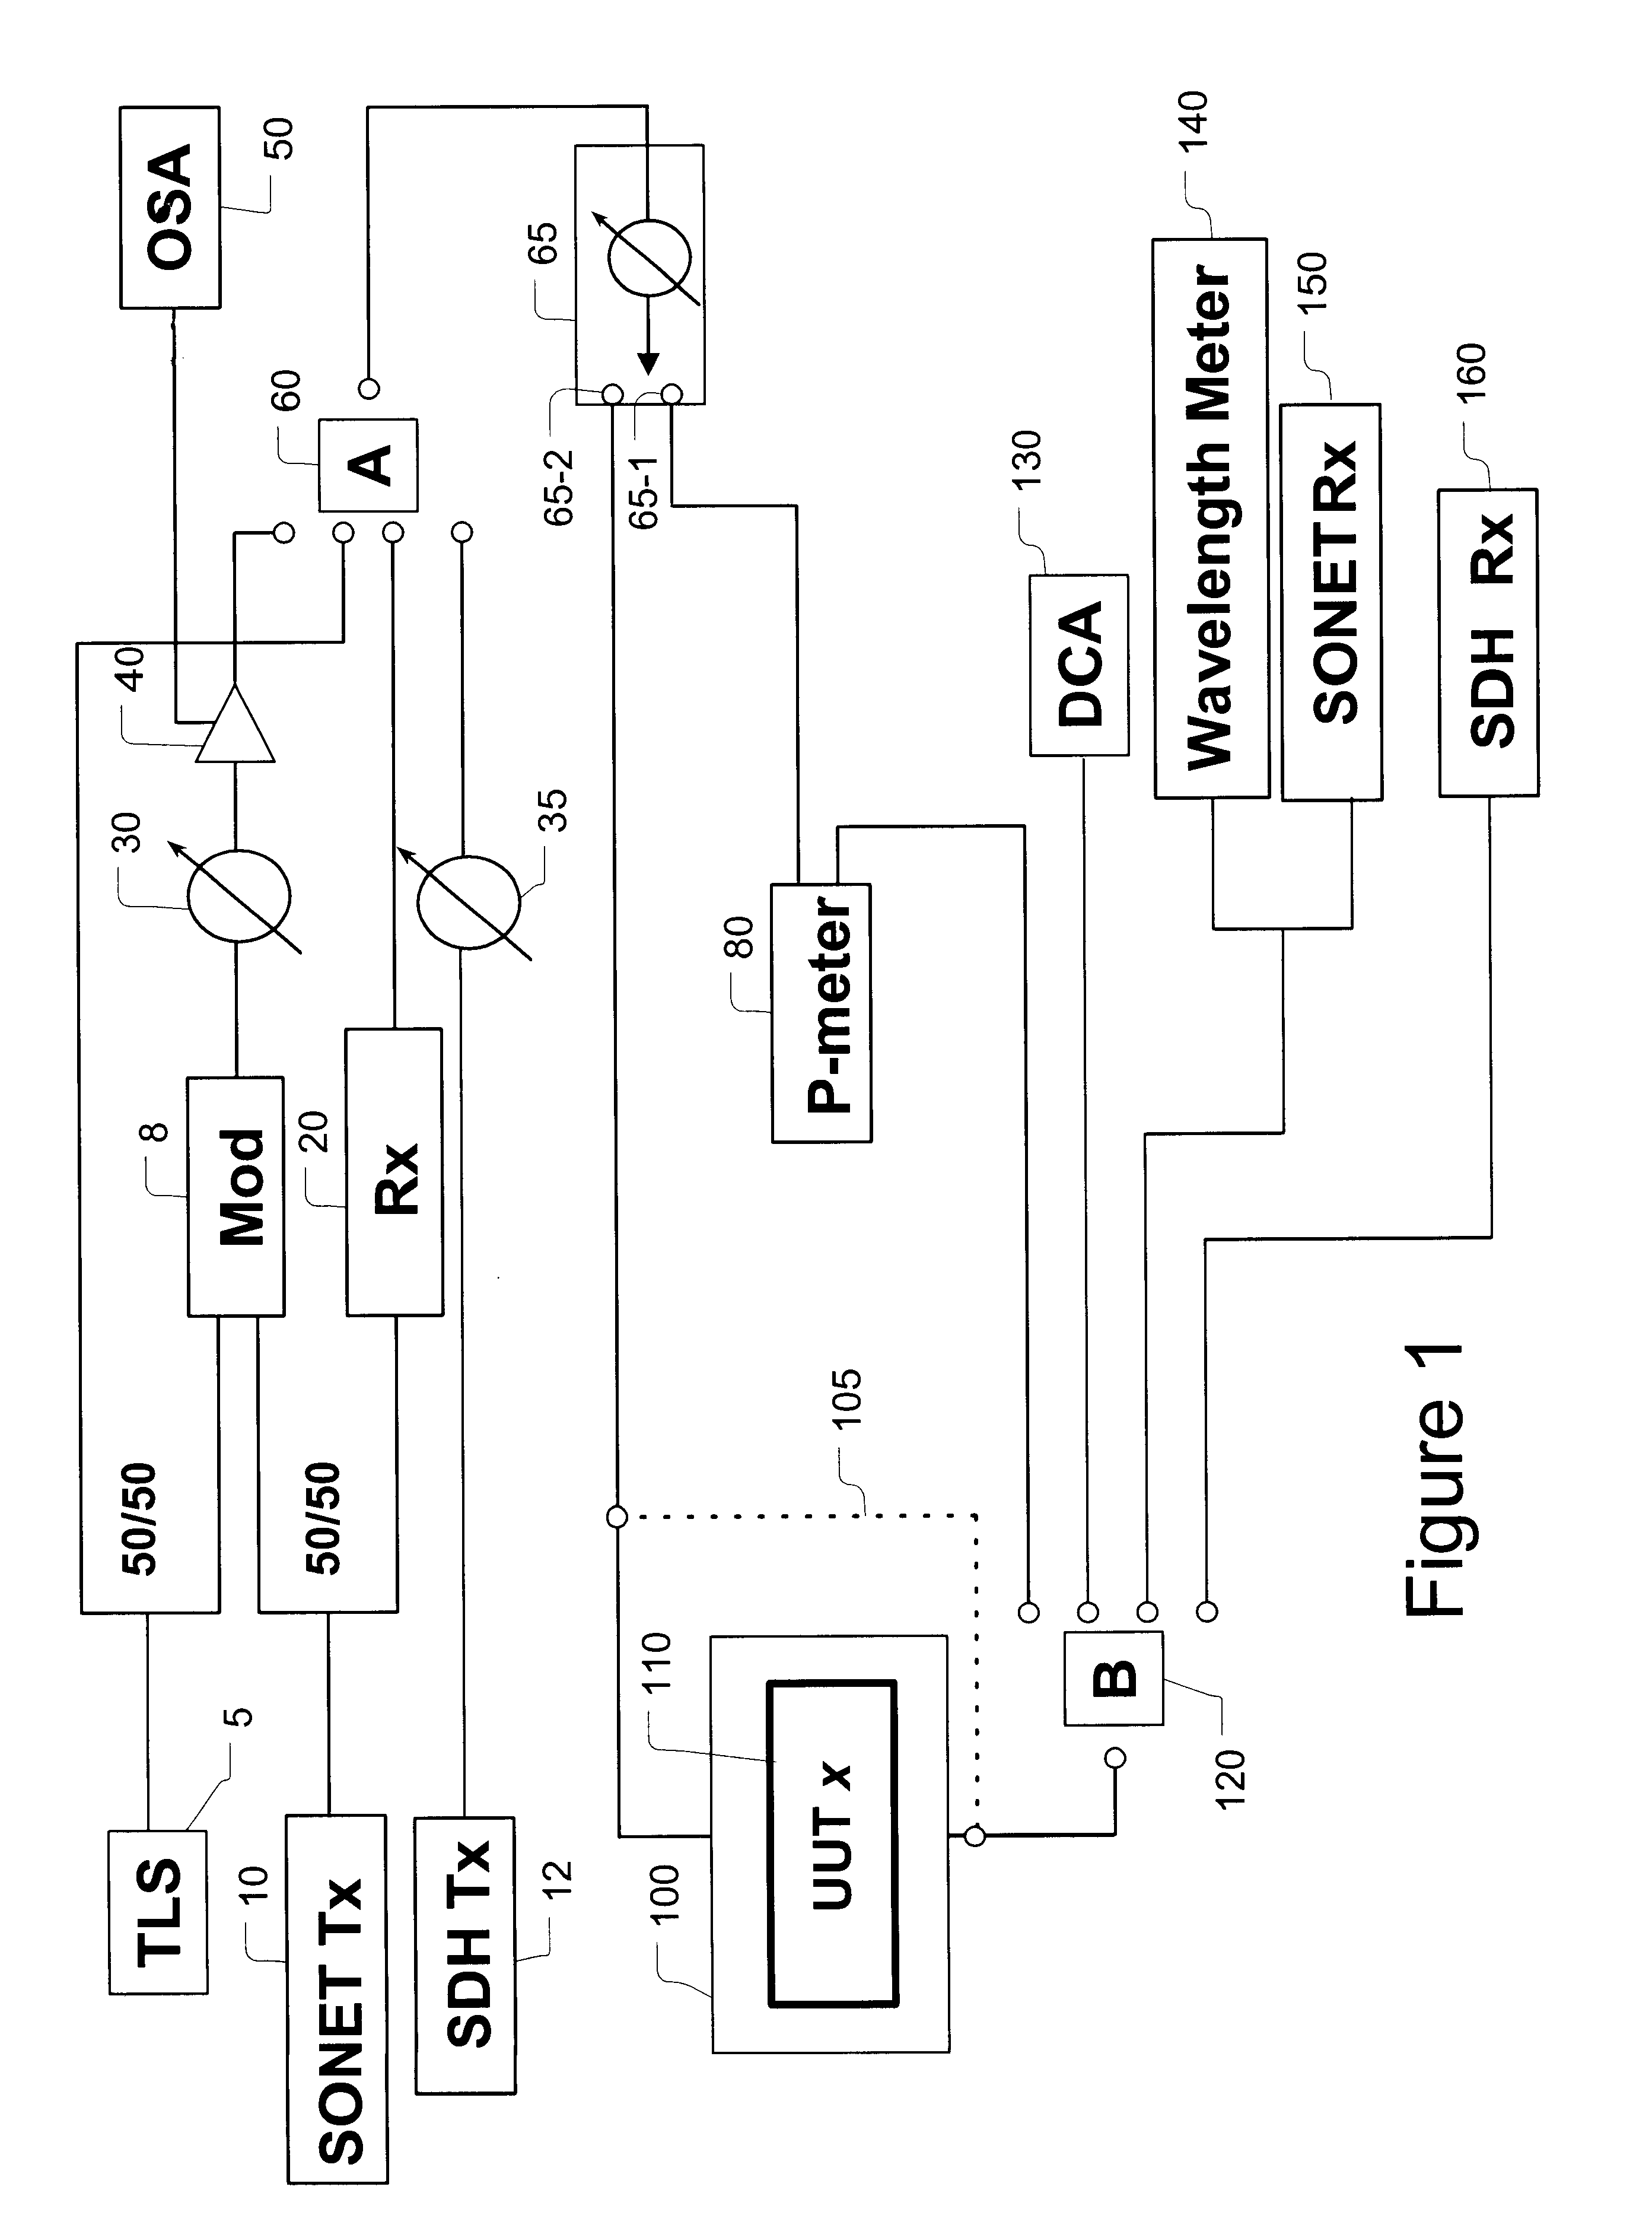 Method and apparatus for performing parallel asynchronous testing of optical modules